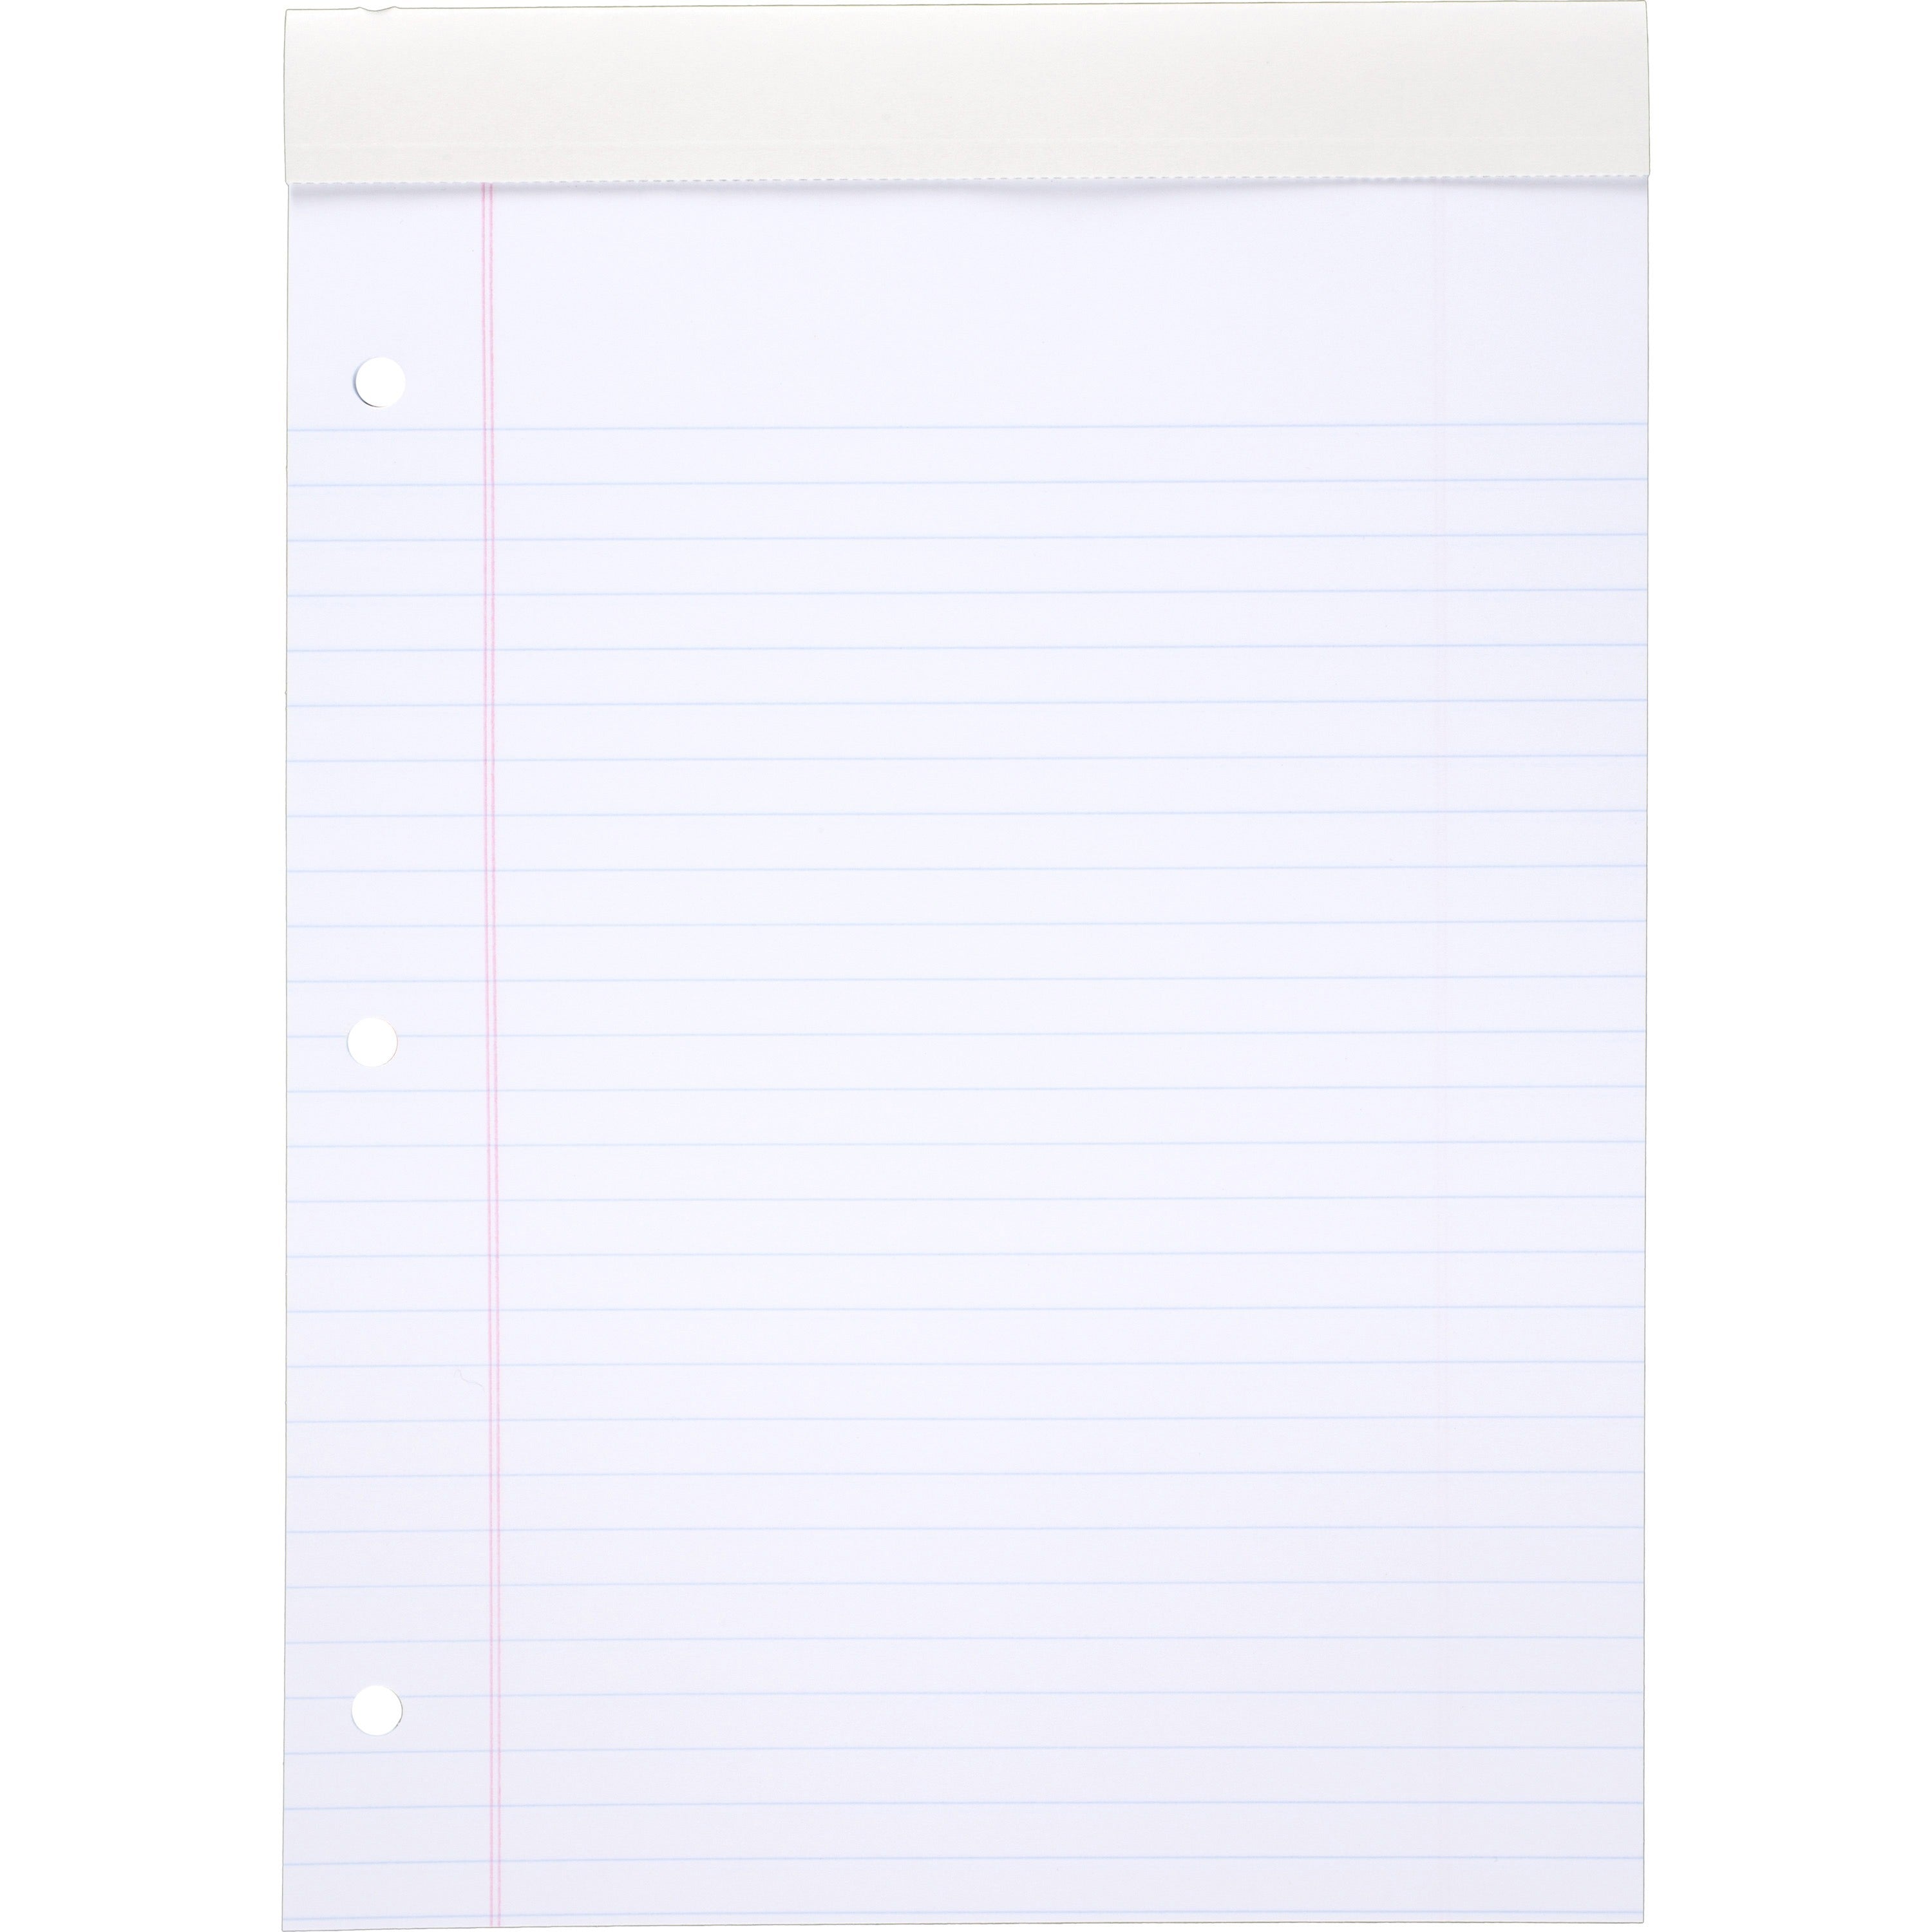 Mead Writing Pads - Letter - 70 Sheets - 140 Pages - College Ruled - 0.34" Ruled - 20 lb Basis Weight - Letter - 8 1/2" x 11" - White Paper - Heavyweight, Micro Perforated, Stiff-back, Heavy Duty Cover, Stiff-back, Cardboard Back, Portable, Easy Tear - 